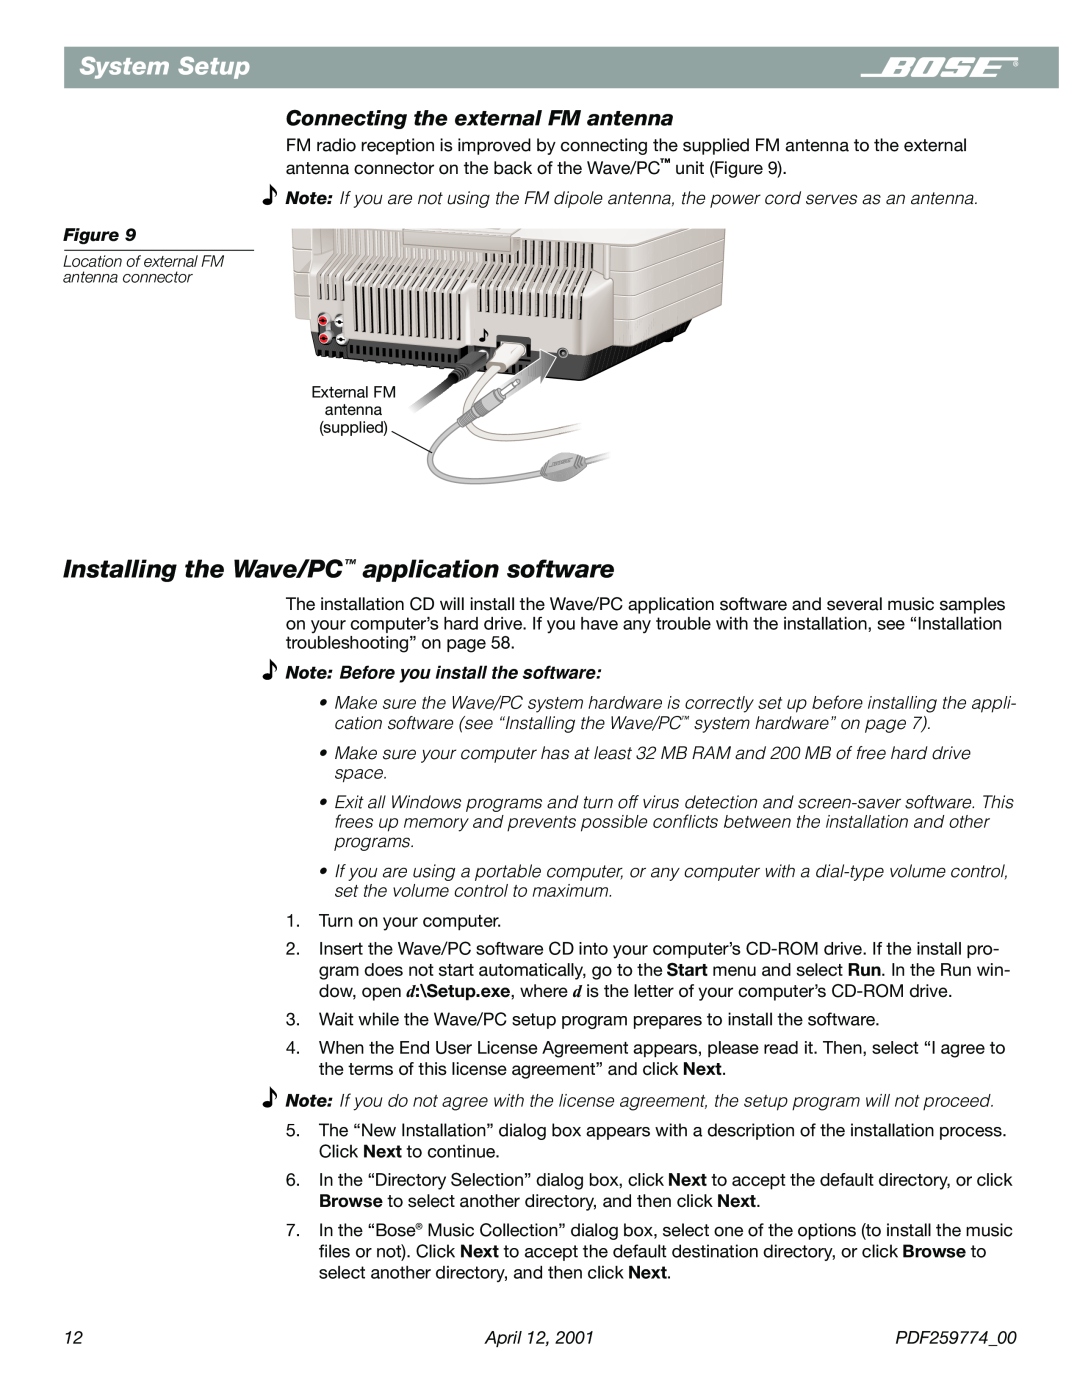 Bose PDF259774_00 manual Installing the Wave/PC application software, Connecting the external FM antenna, System Setup 